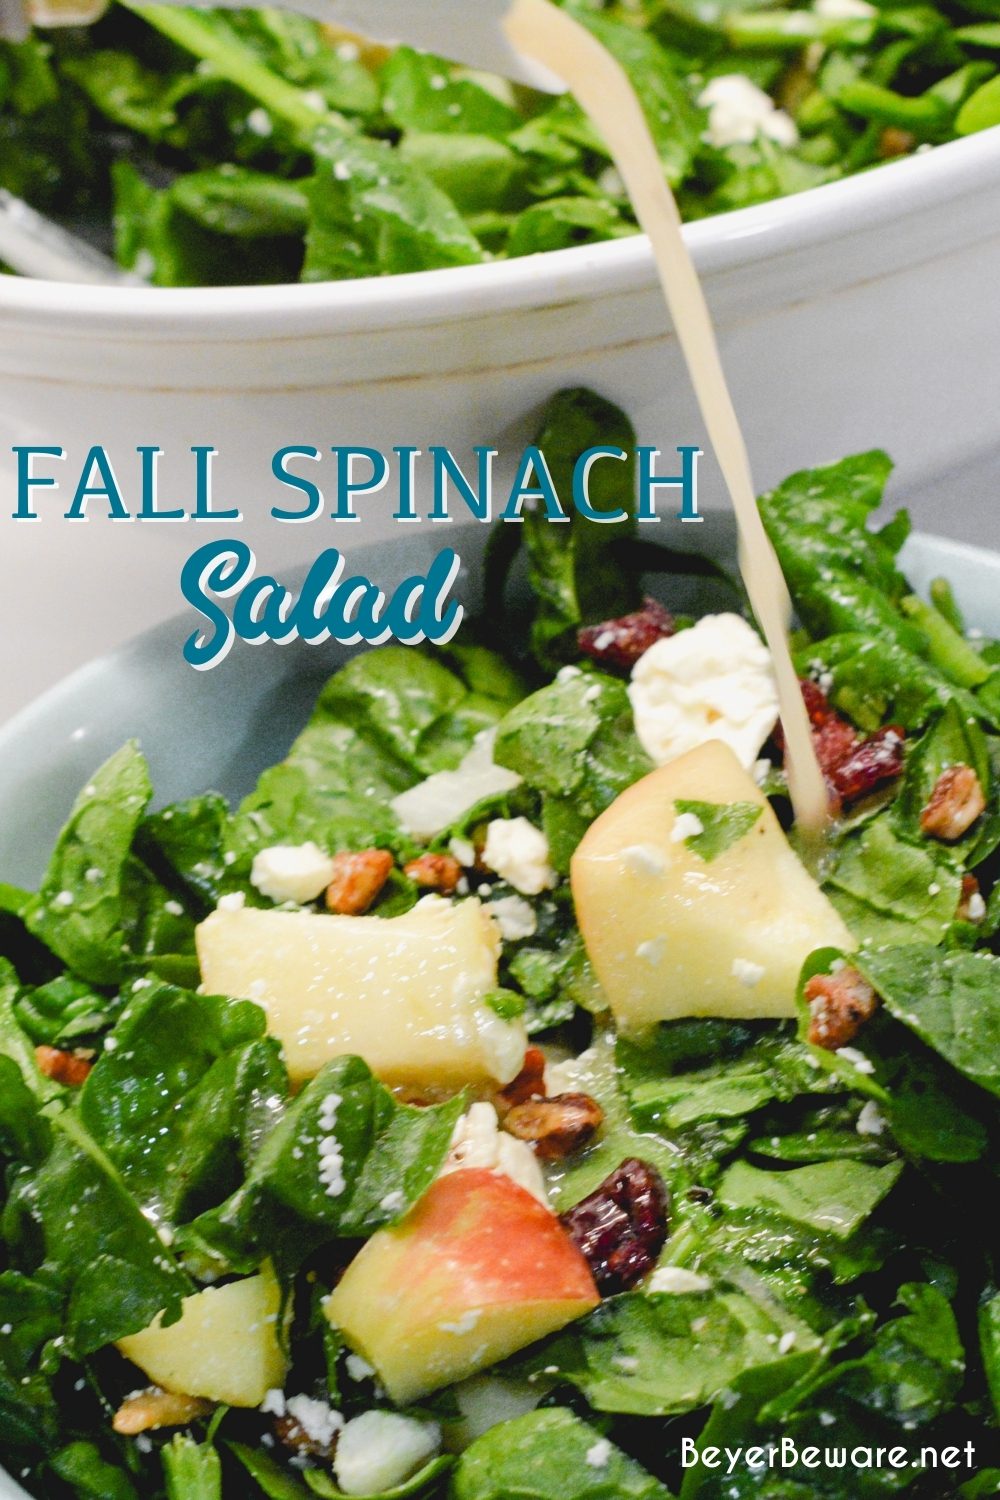 Apple spinach salad is a sweet and savory mixture of spinach, apples, pecans, cranberries, and feta cheese finished with a maple dijon vinaigrette.